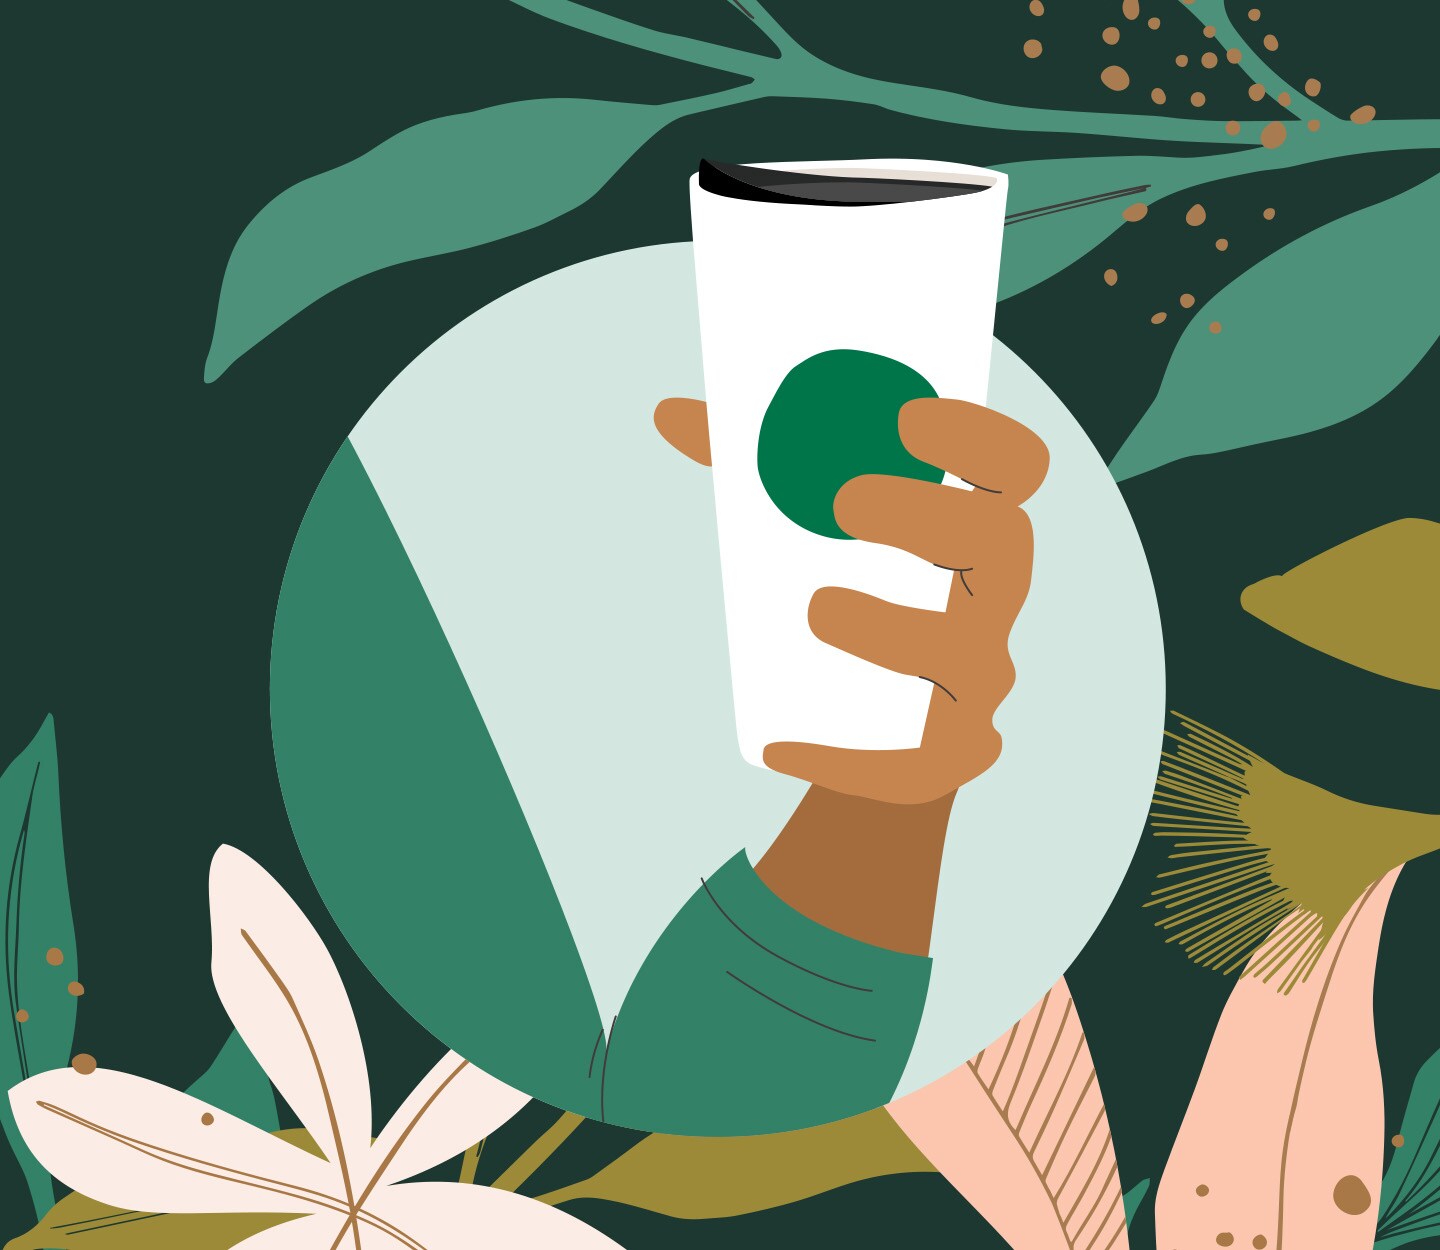 An illustration of a hand holding a reusable Starbucks cup, surrounded by colorful flowers and plants.